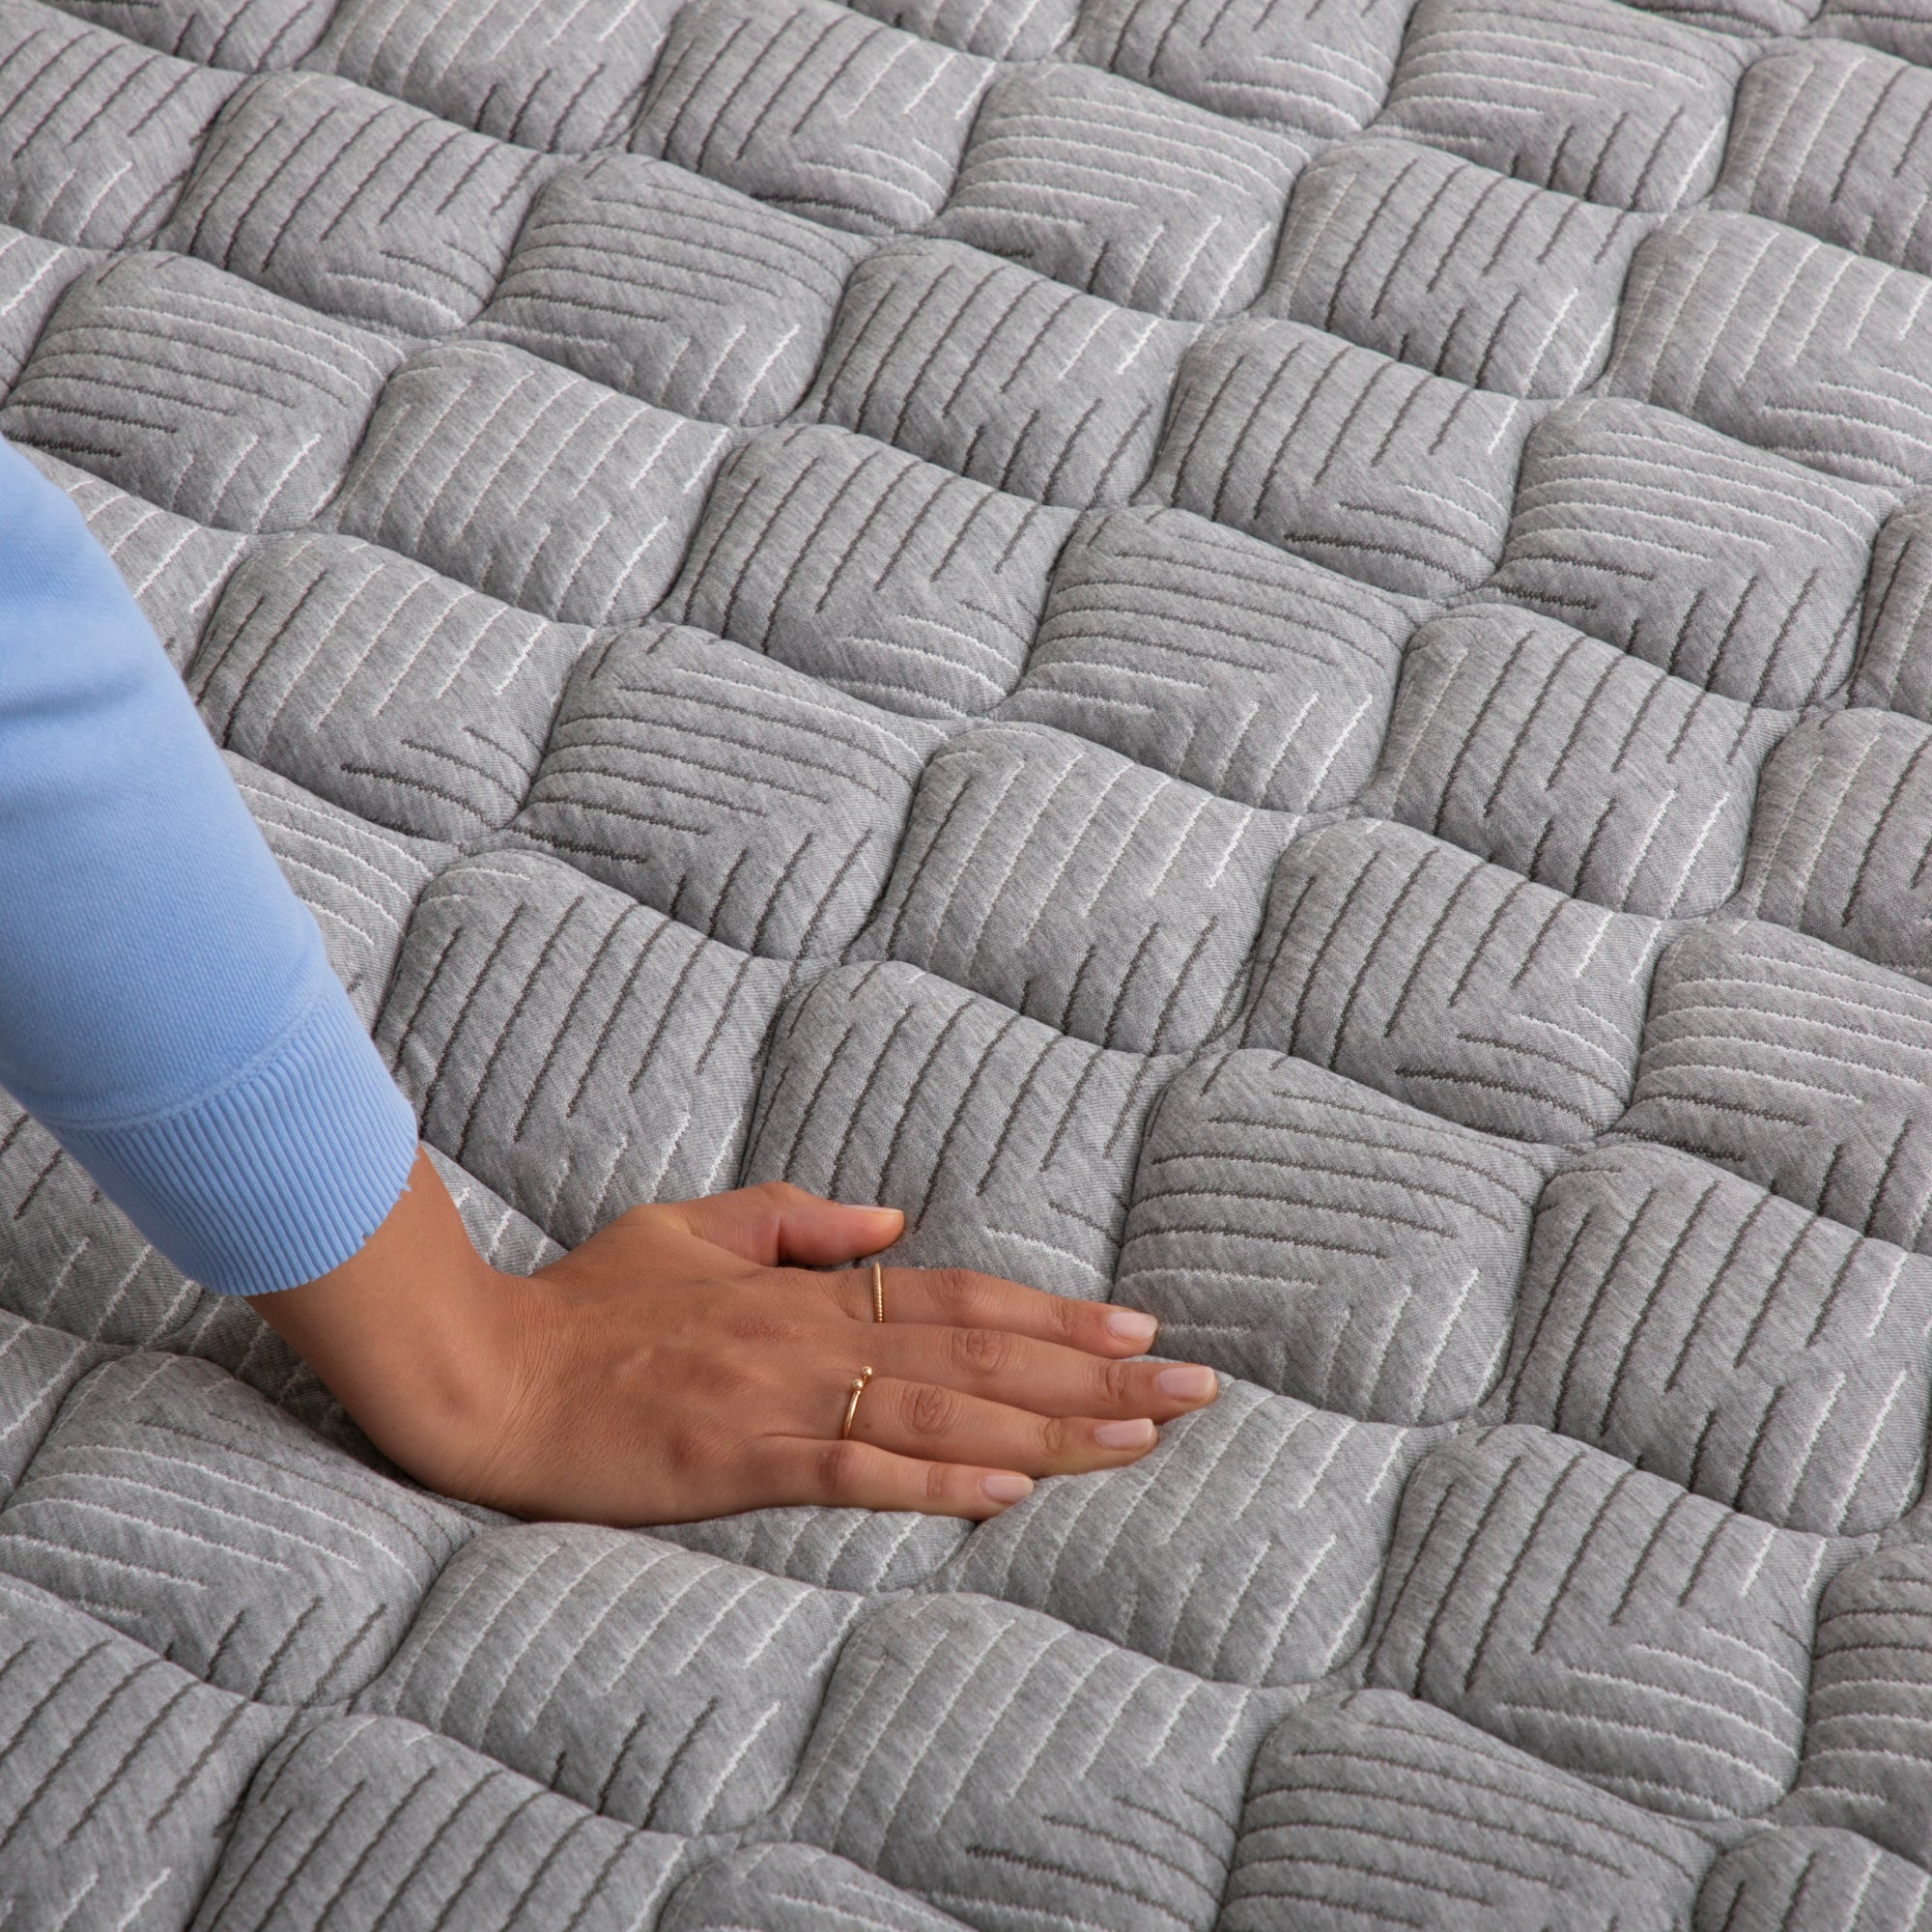 Hand pressing down on Quilted Firm Mattress